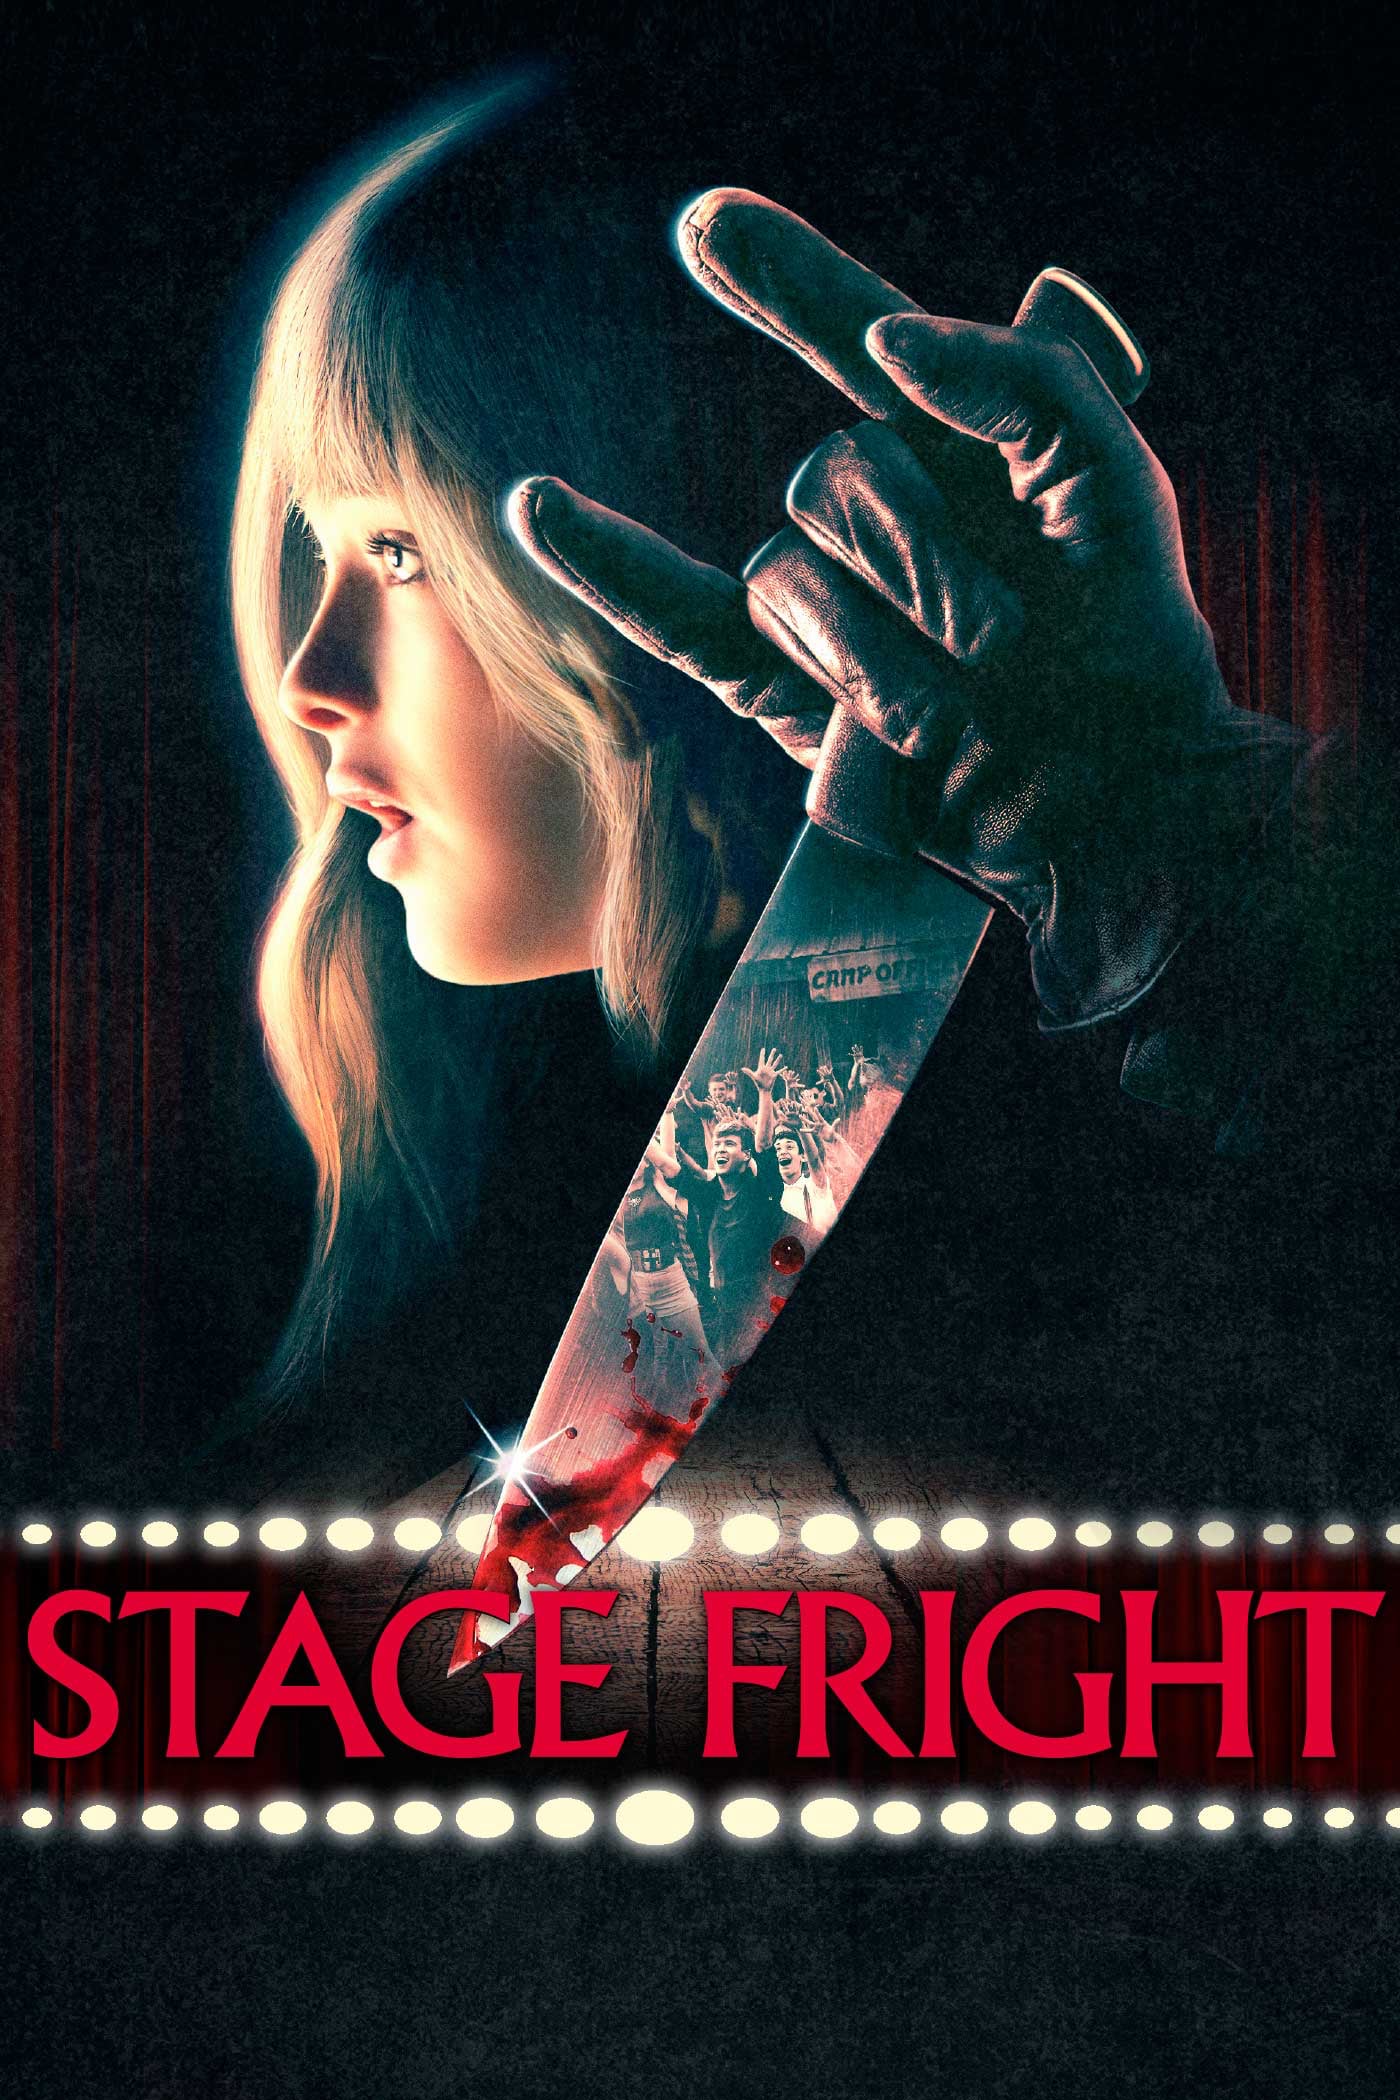 Poster for the movie "Stage Fright"